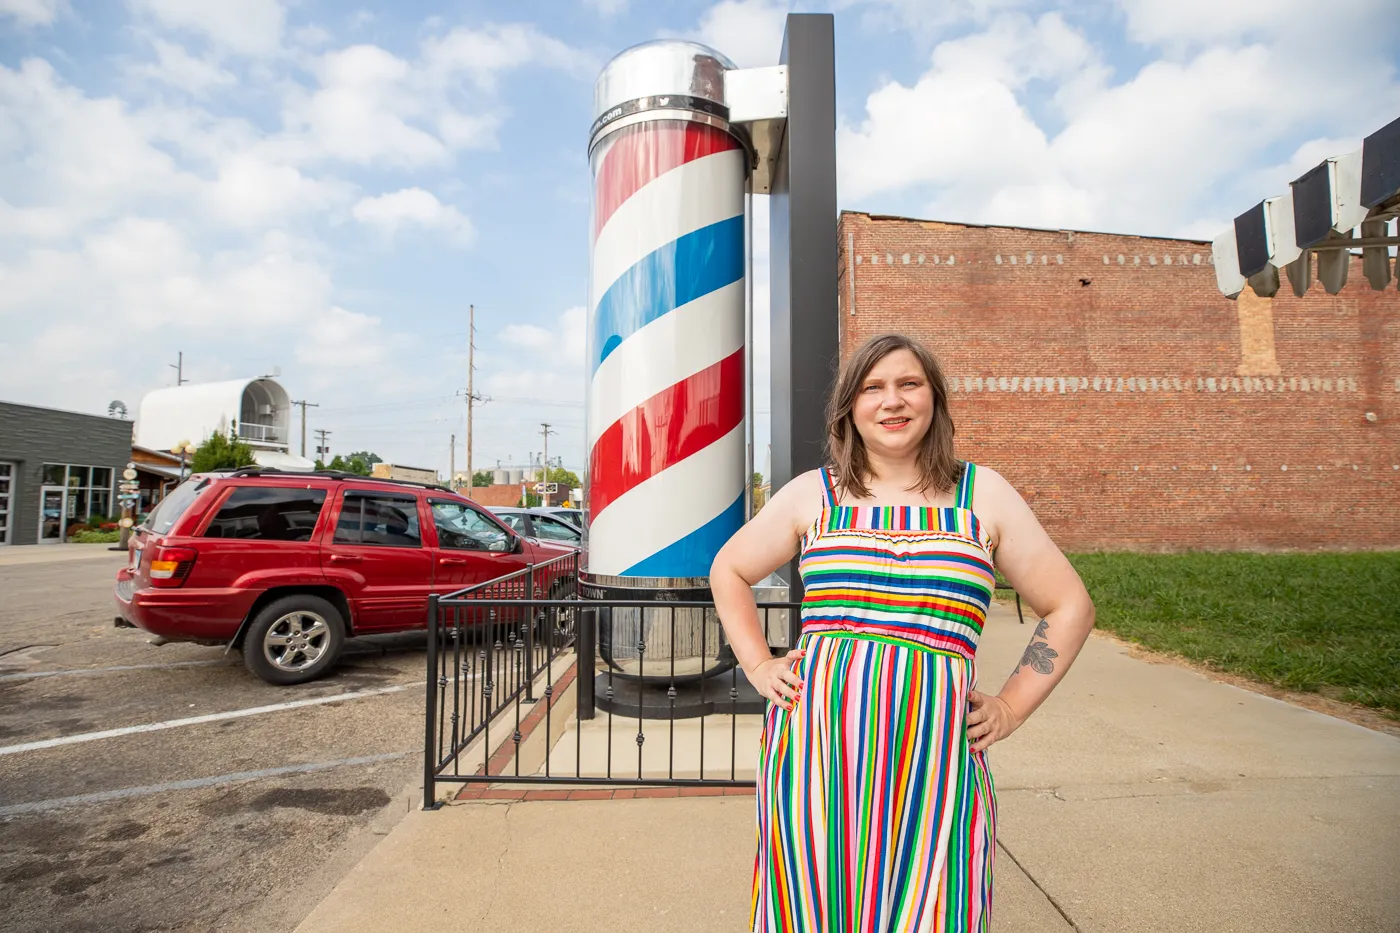 World's Largest Barbershop Pole in Casey, Illinois roadside attraction